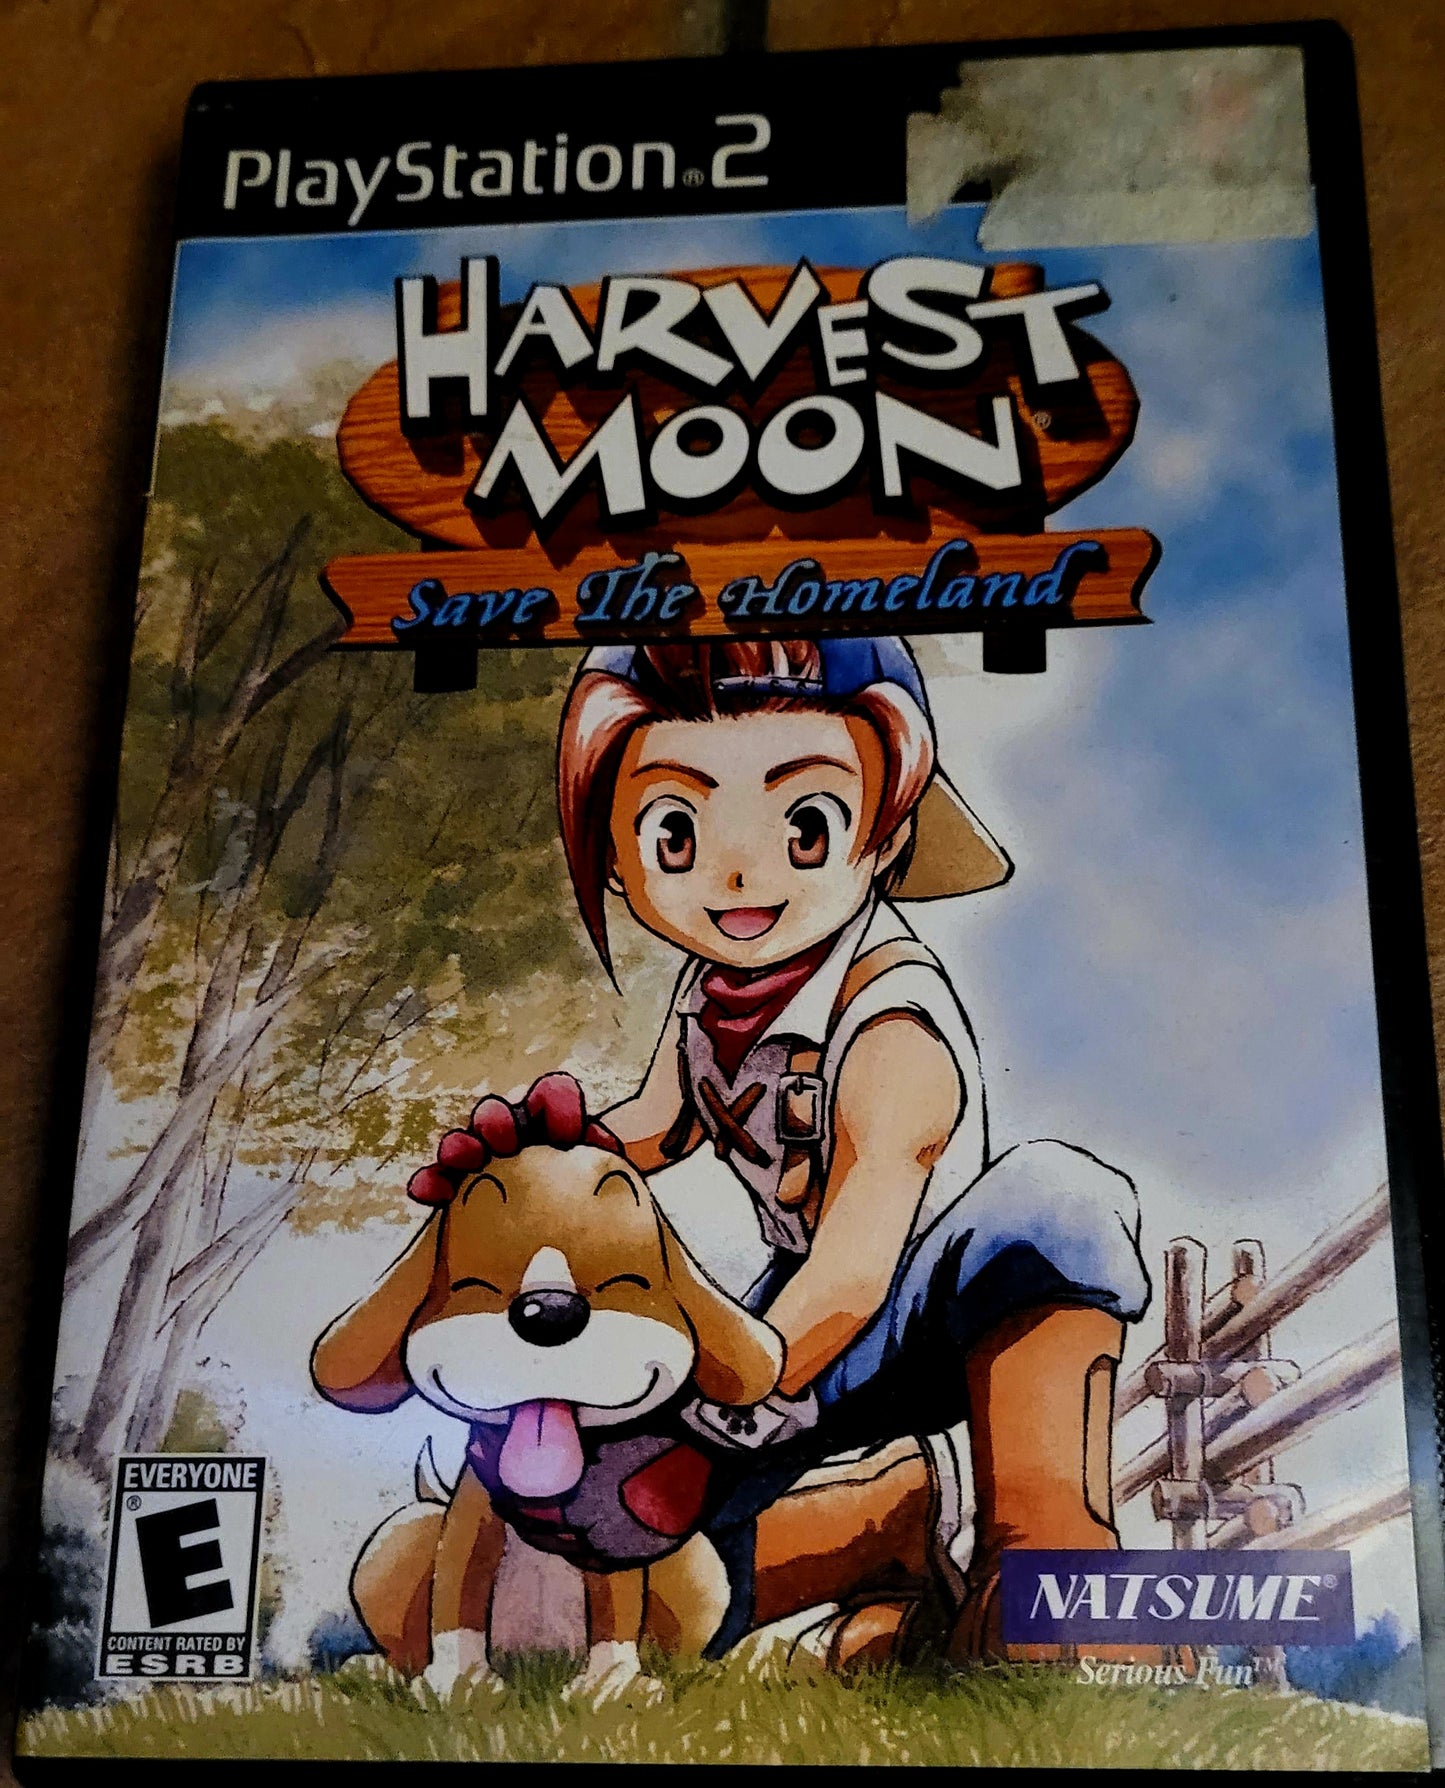 PlayStation 2 - Harvest Moon: Save the Homeland Video Game